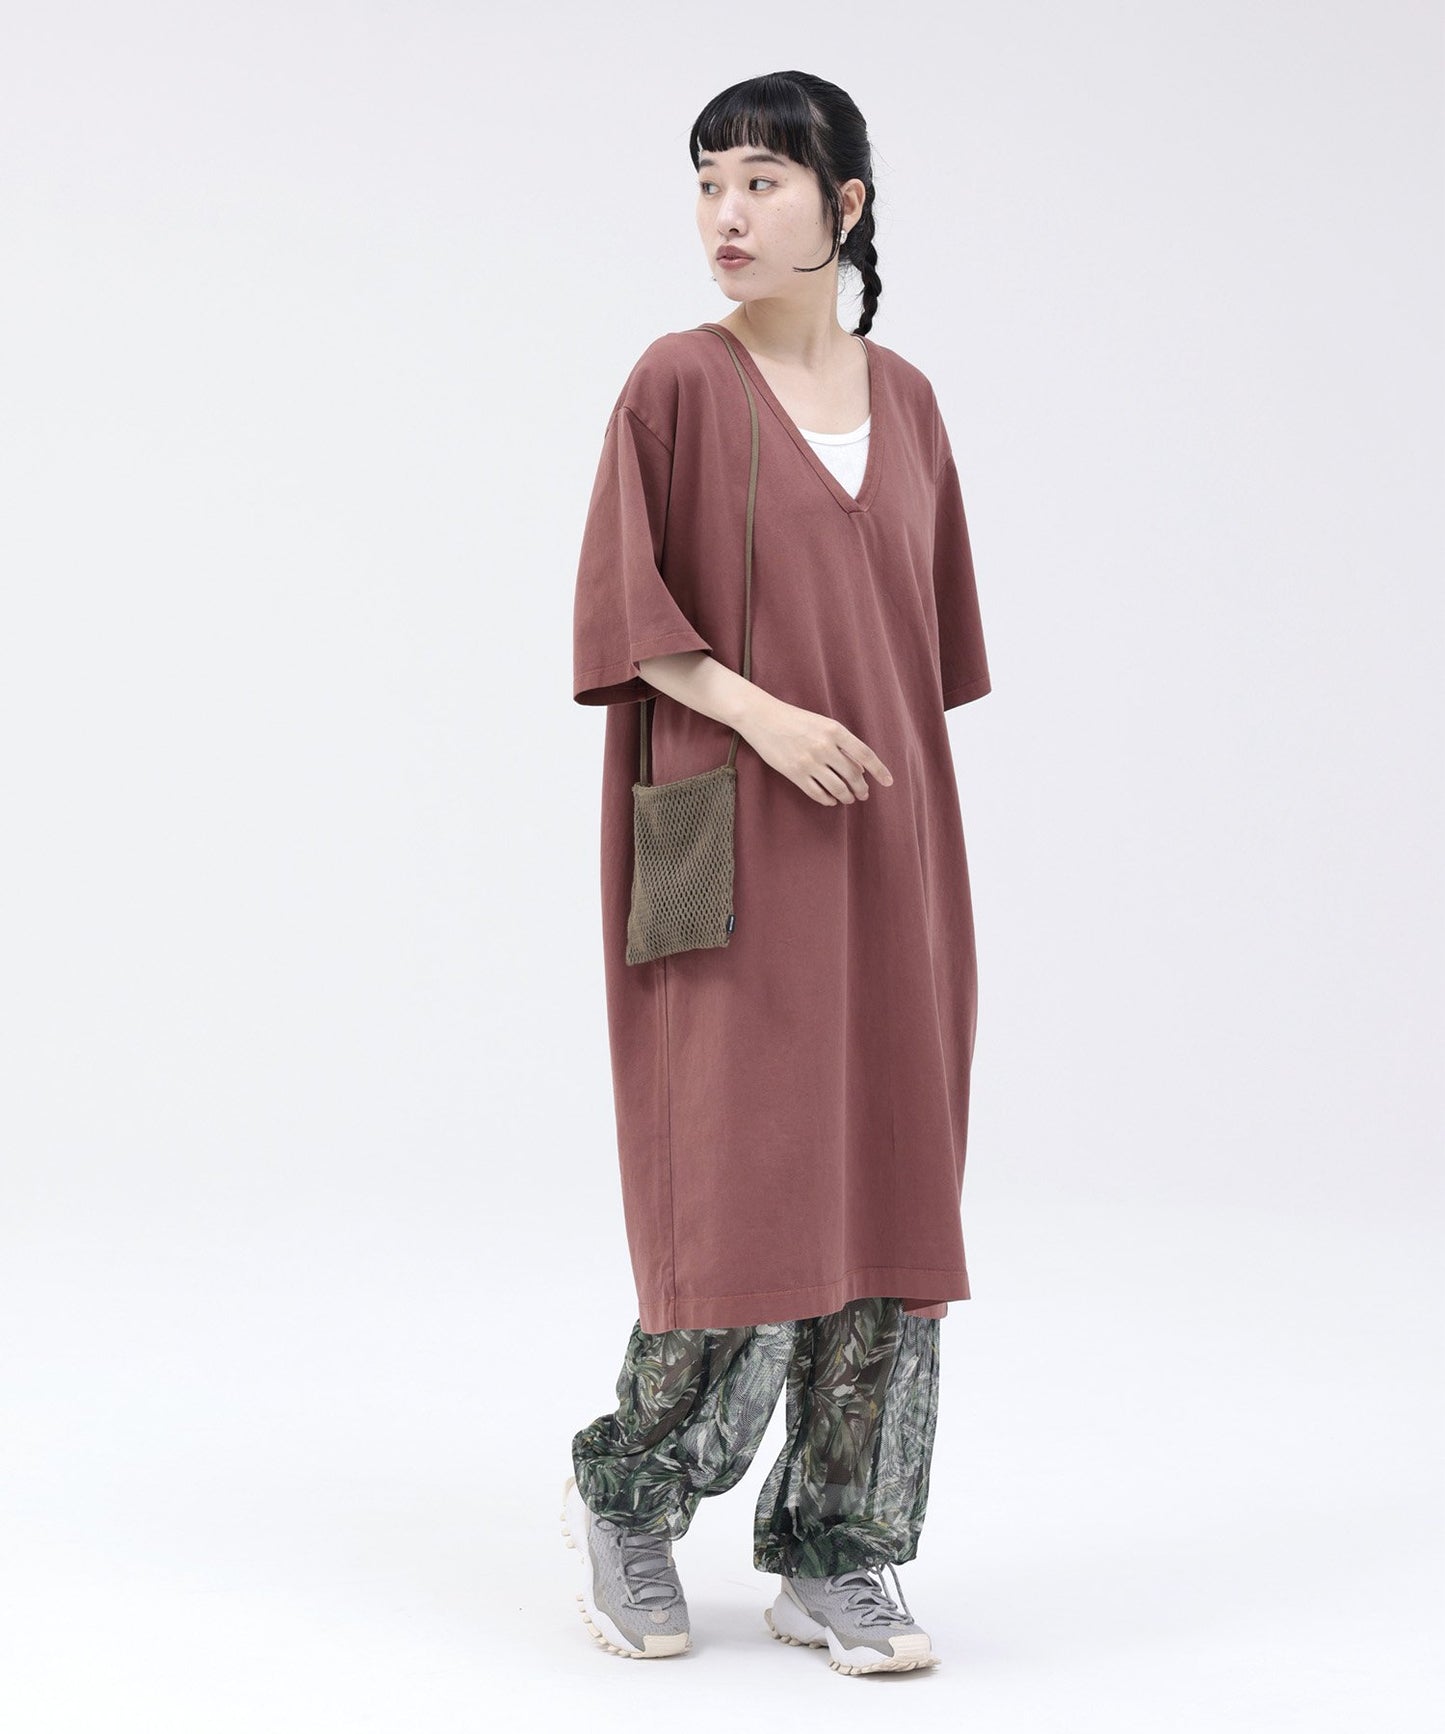 [Environmentally friendly material] OG GD COTTON V/N SACK DRESS Organic cotton Product dyed [155-165cm]